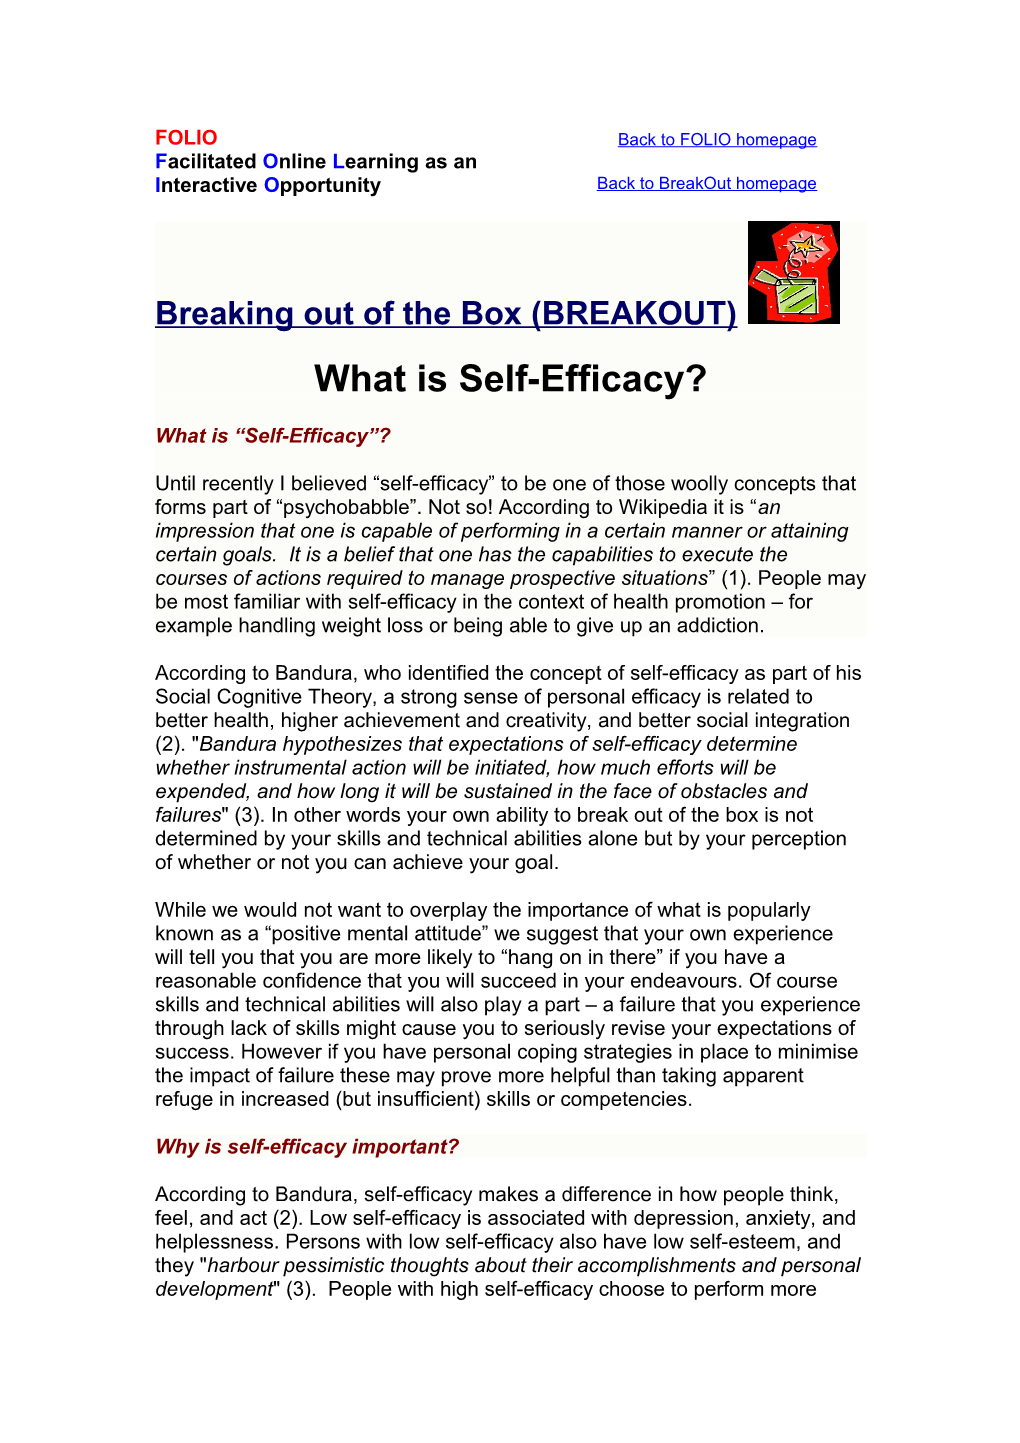 What Is Self-Efficacy?